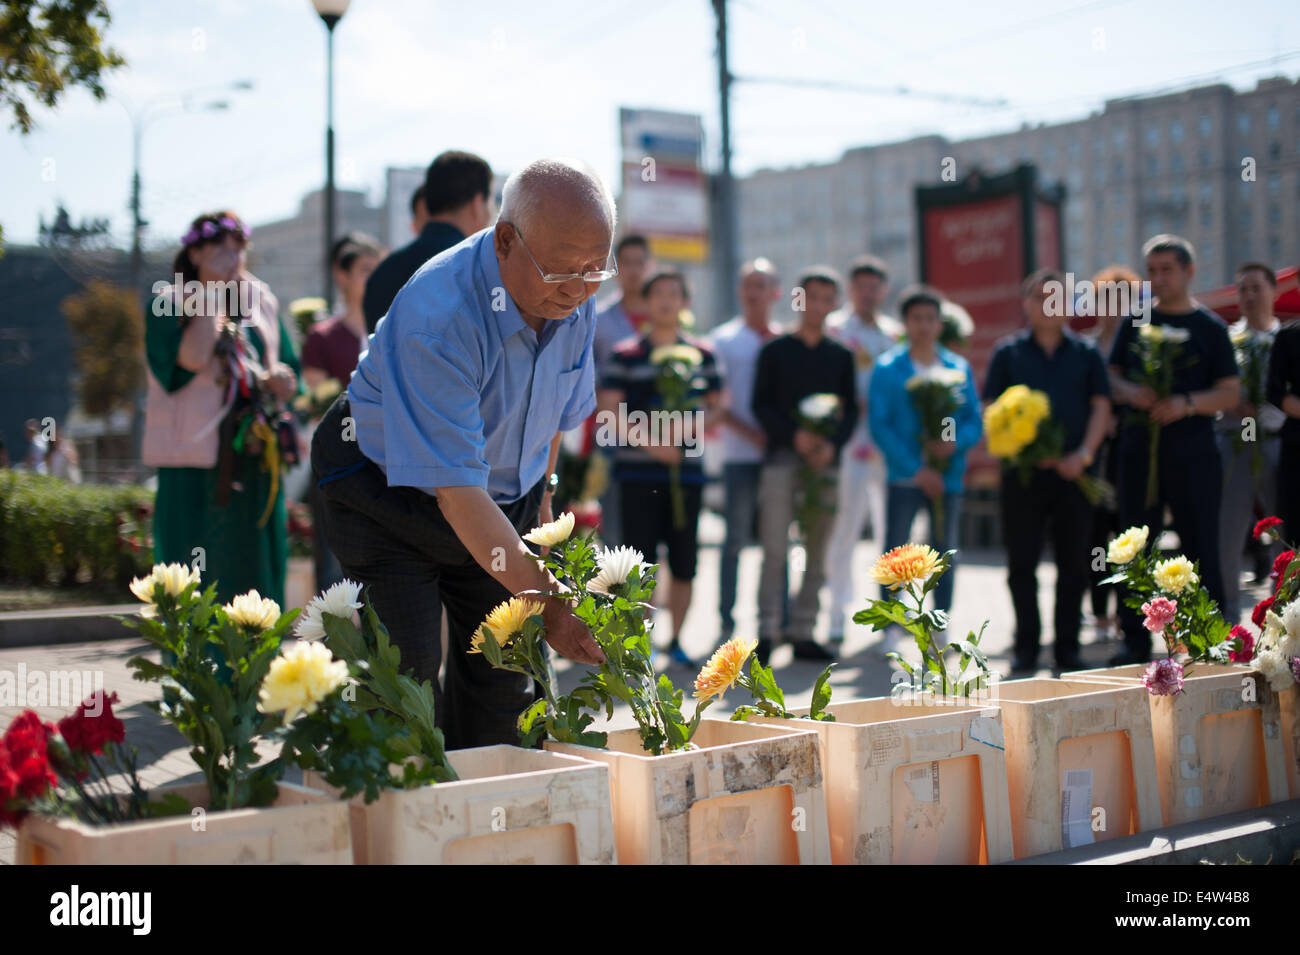 Moscow, Russia. 17th July, 2014. An old man lays flowers for the victims of Moscow's subway derailment to convey his condolences in Moscow, Russia, July 17, 2014. At least 22 people died and hundreds more were injured in a subway train derailment in Moscow on Tuesday. Credit:  Dai Tianfang/Xinhua/Alamy Live News Stock Photo